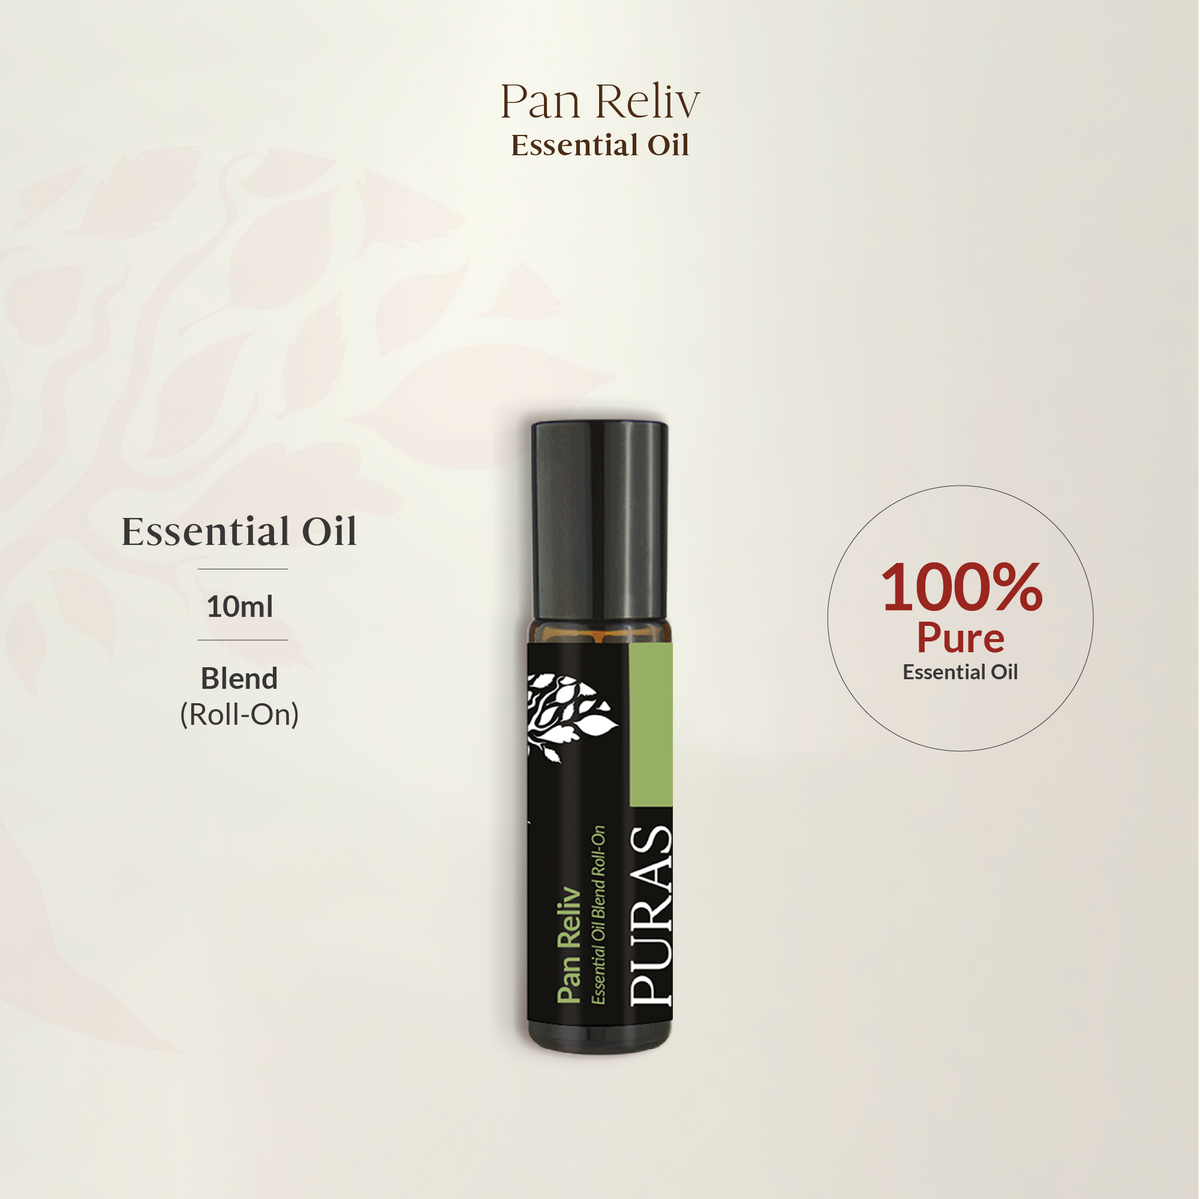 Pan Reliv Essential Oil Blend (Roll-On) 10ml